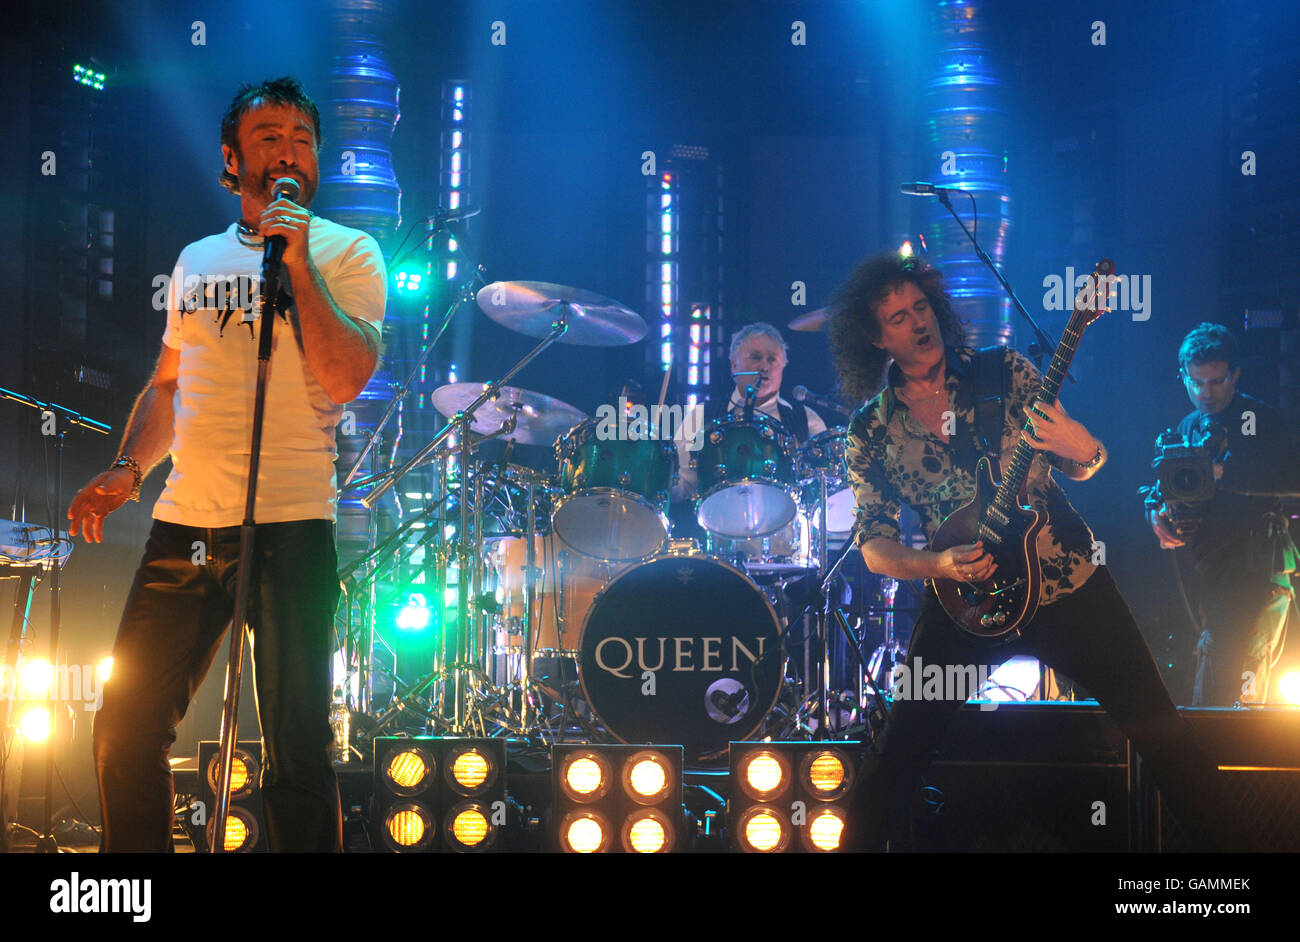 (Left-right) Paul Rodgers, Roger Taylor (drums) & Brian May of Queen during their performance on 'Al Murray's Happy Hour' (TX: ITV1 Friday April 4, 2008 @ 2200), London Studios, SE1. Stock Photo